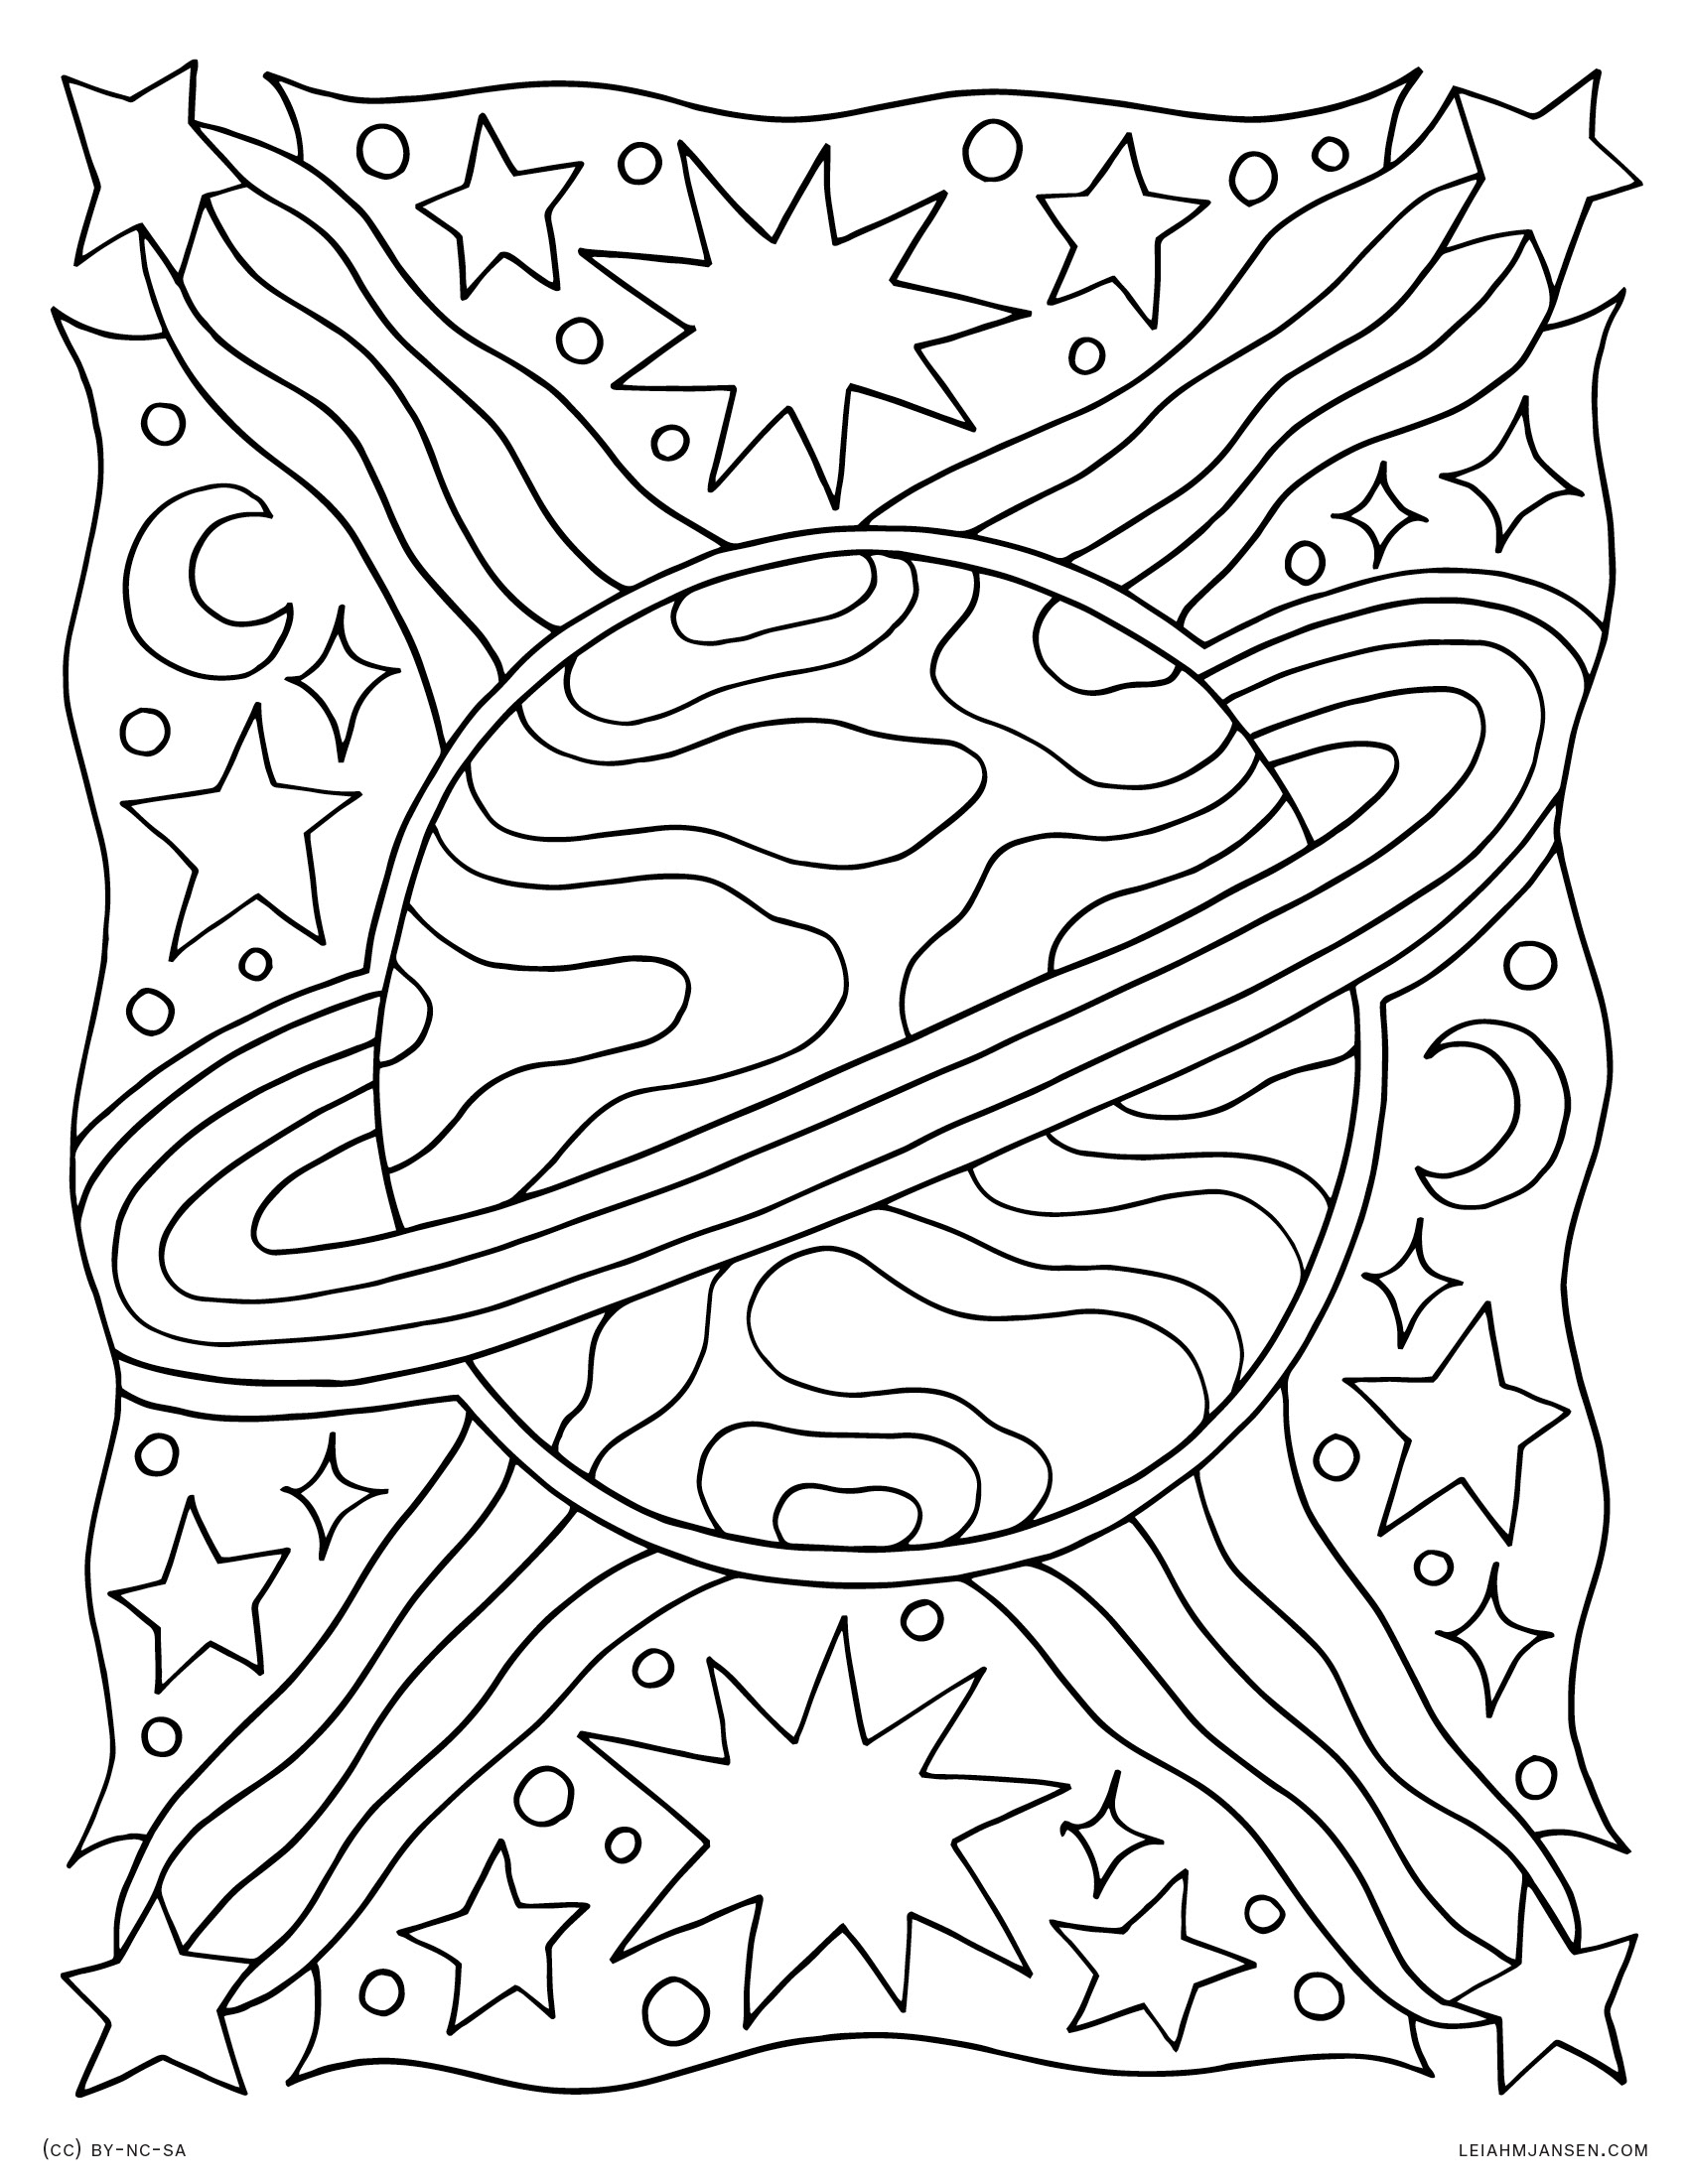 Outer Space Planet Psychedelic Saturn Free Printable Coloring Page for Adults and Kids